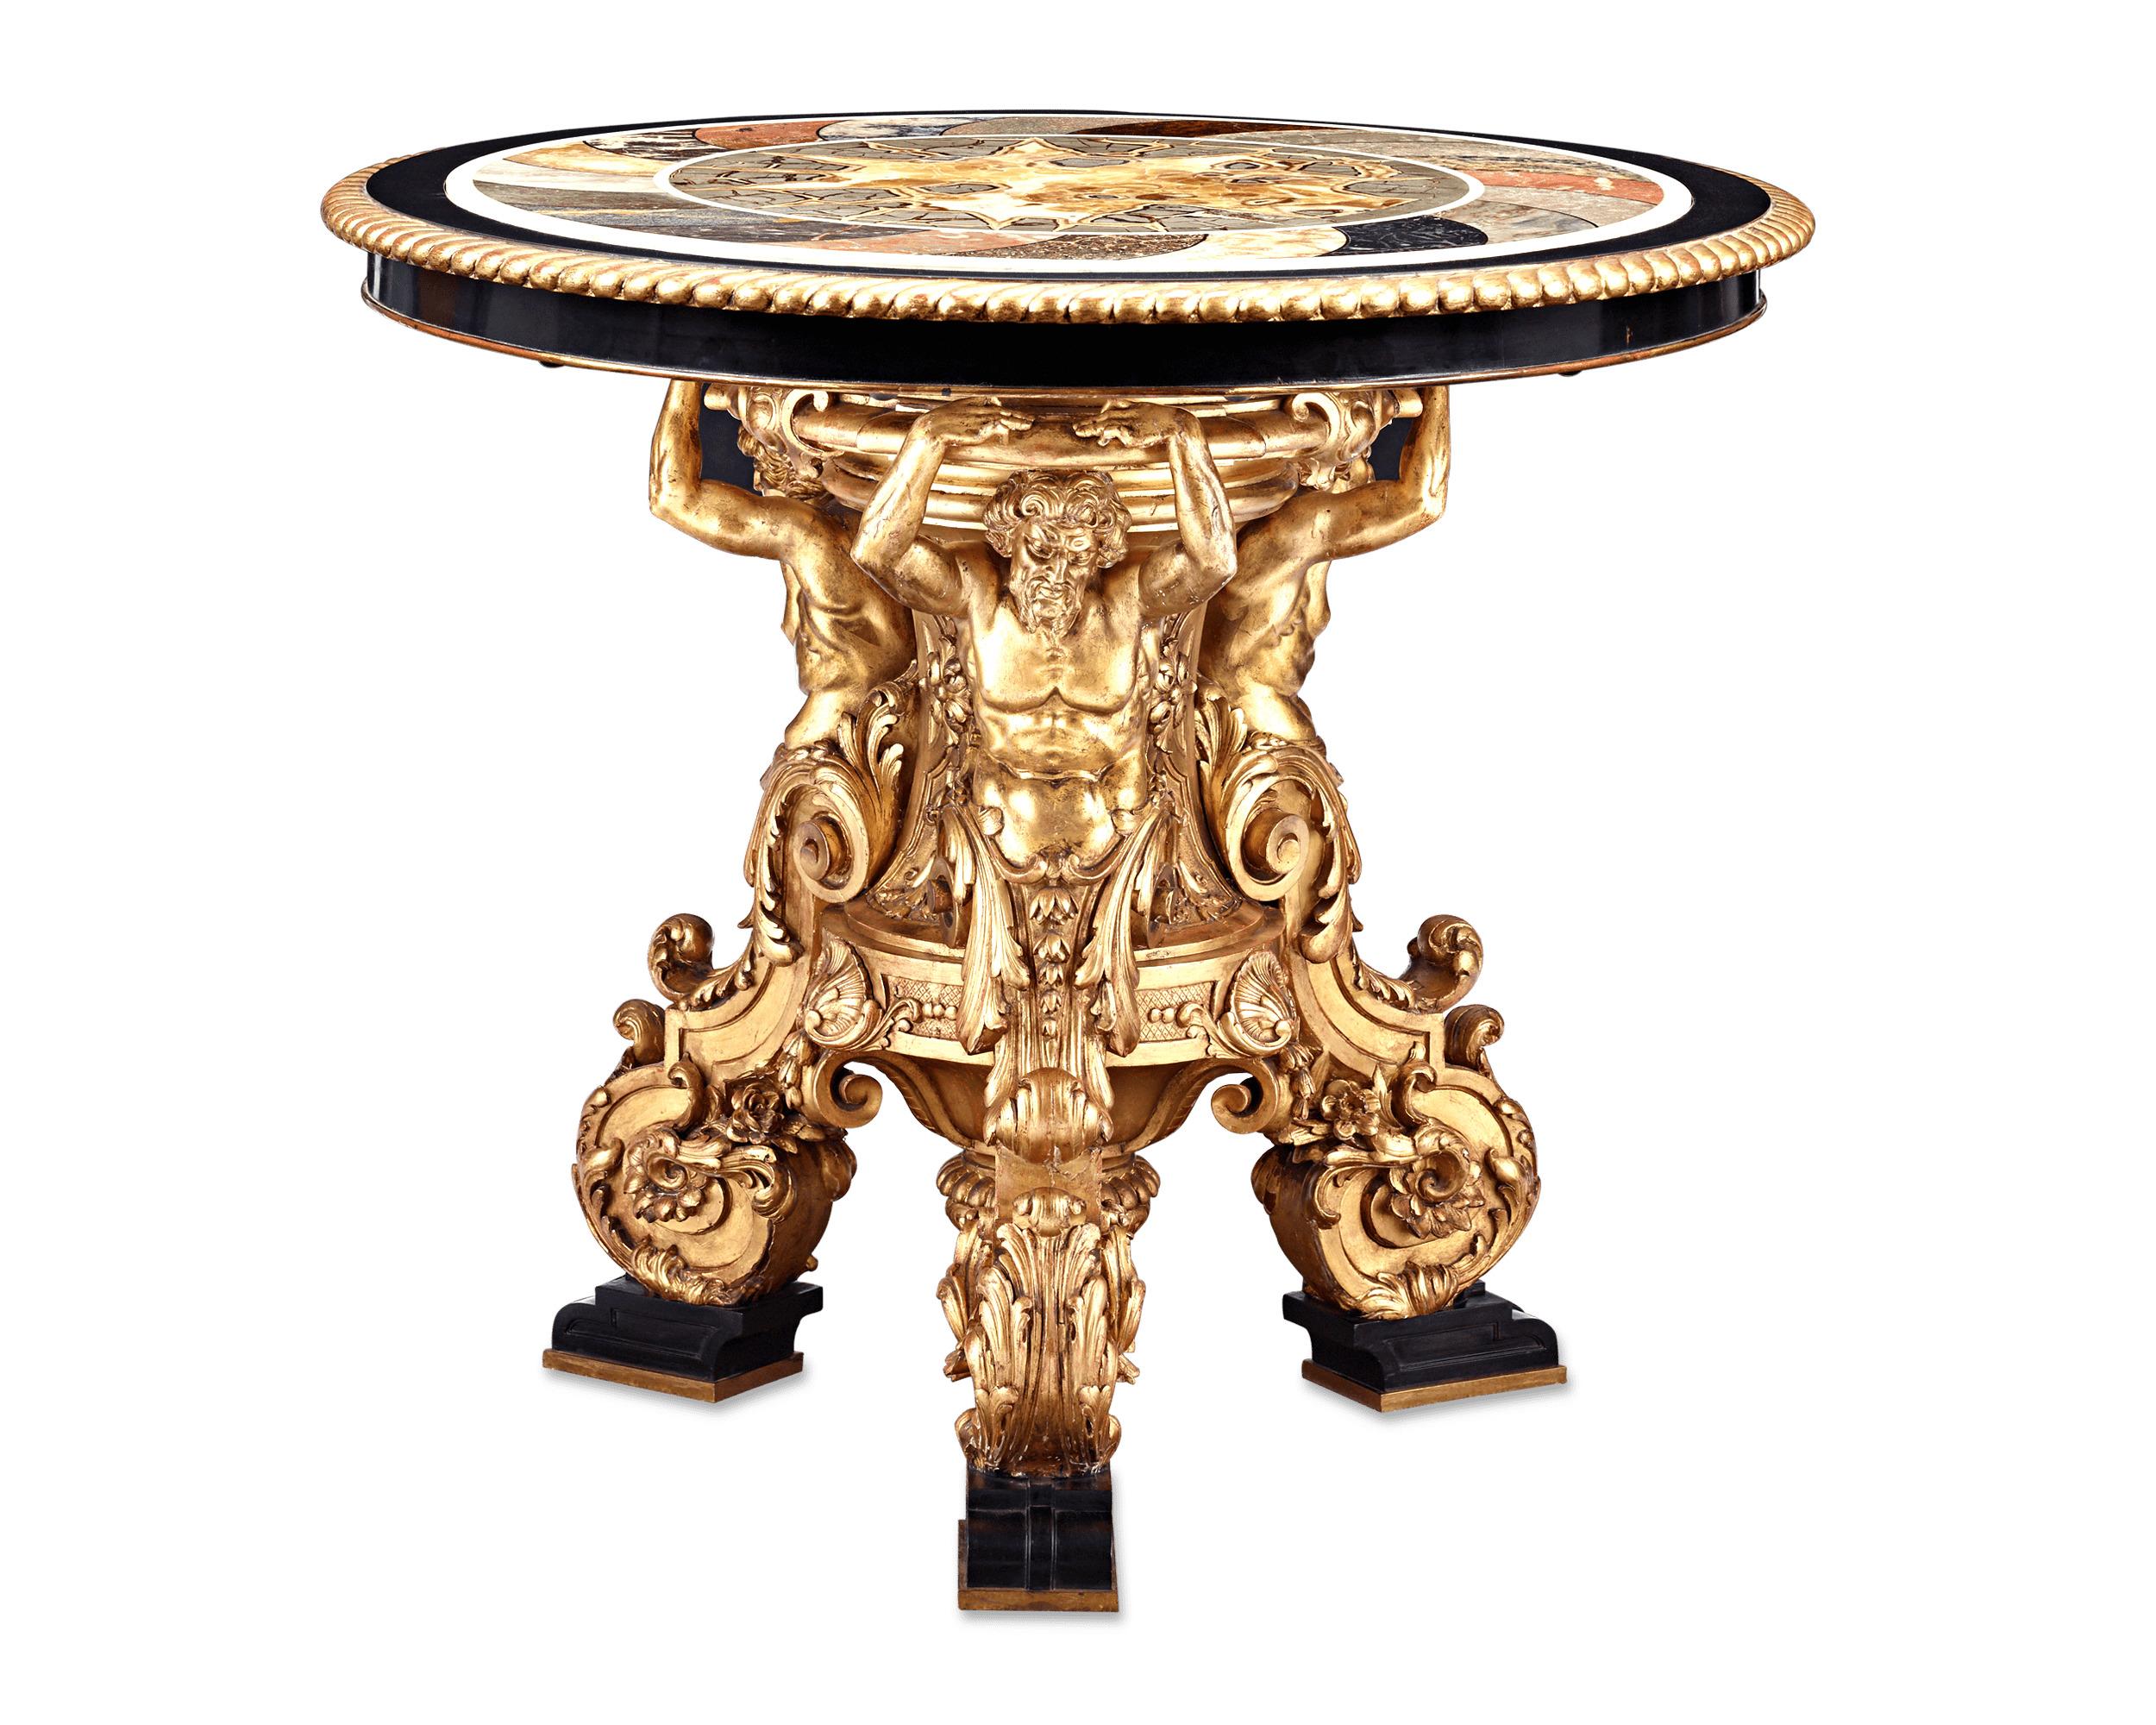 This important and exceptionally rare table is exemplary of the grand architectural marble pieces that were popular amongst the upper classes during the late 18th and early 19th century in both Italy and England. An exceptional relic of natural